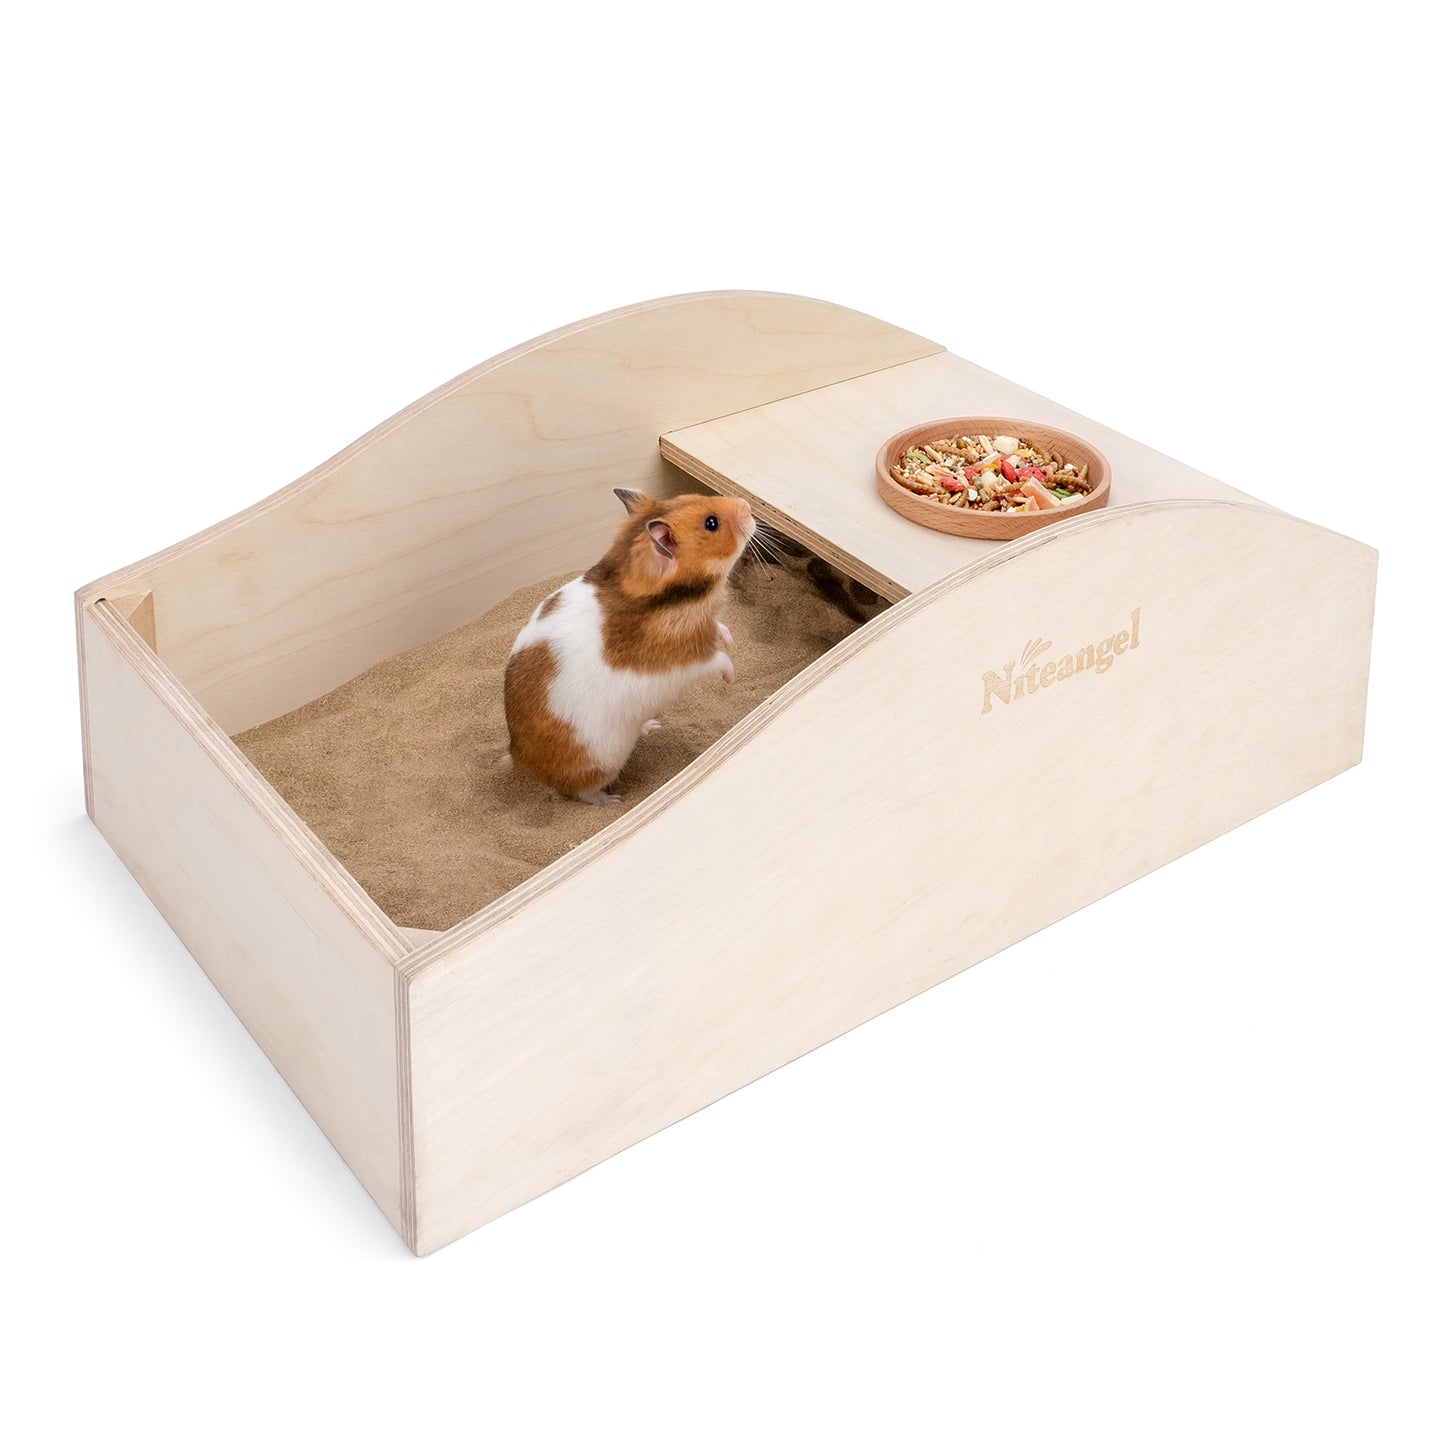 Niteangel Large Wooden Sand Bath with Hideout and Food Bowl for Hamsters - Niteangel Pet CA